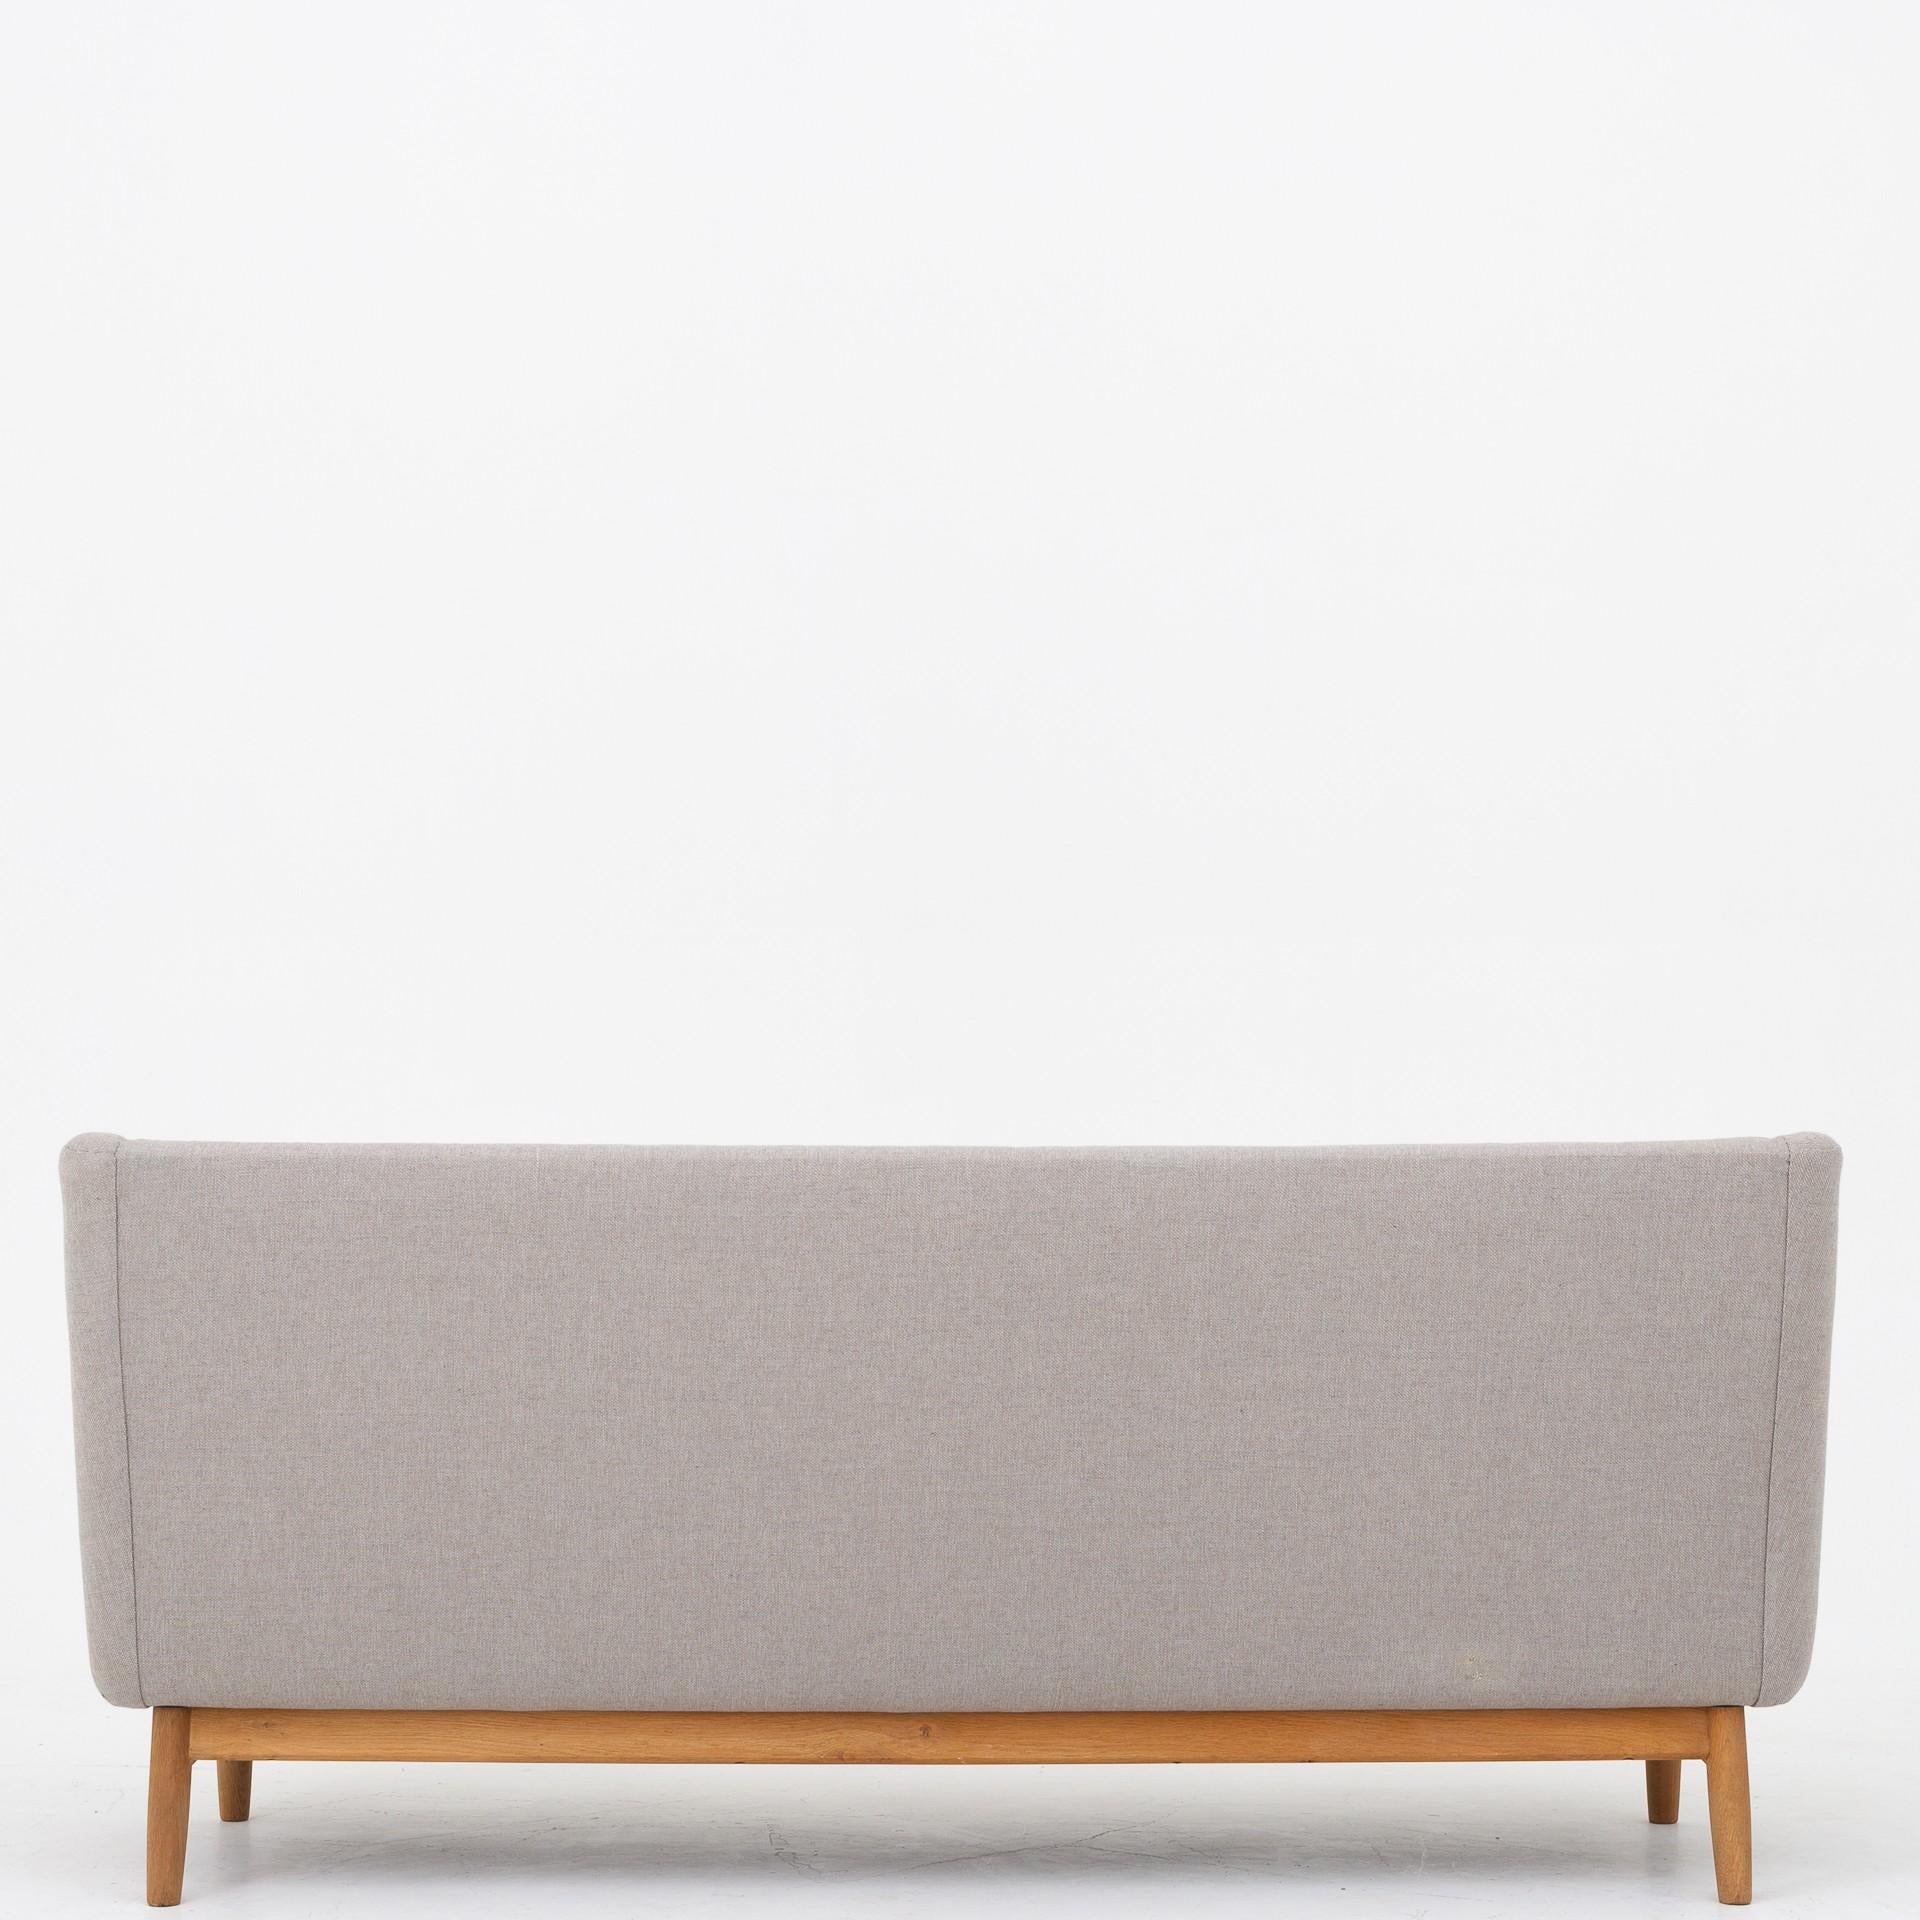 Reupholstered 3-seat sofa in Sunniva 2 fabric from Kvadrat (shell in code 717, seat in code 172)  with frame of oak. Maker Søren Willadsen.